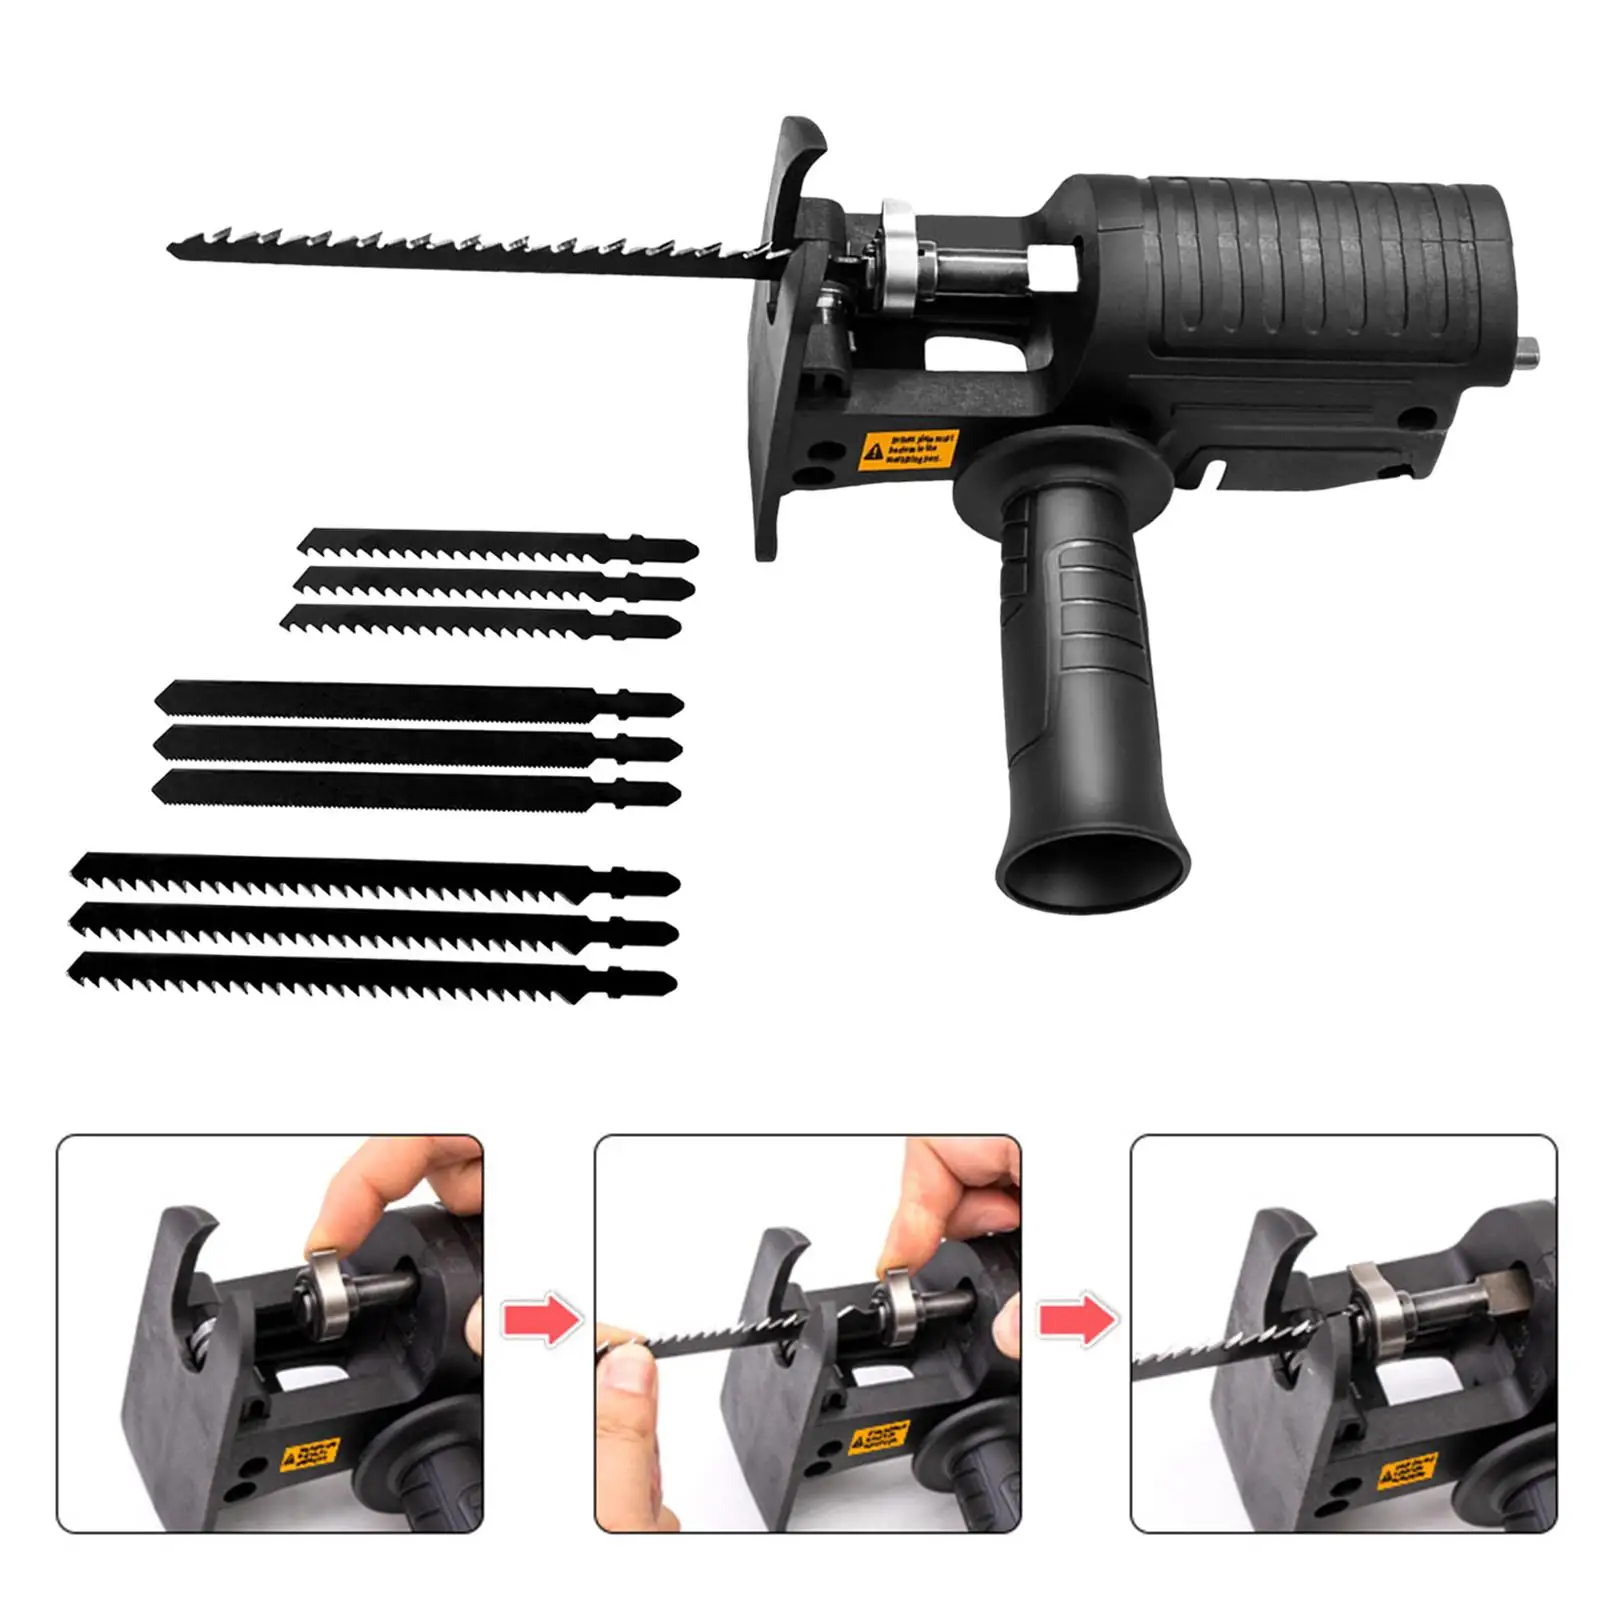 Portable Electric Drill Adapter Woodworking Cutting Tool with 9Pcs Sawblade